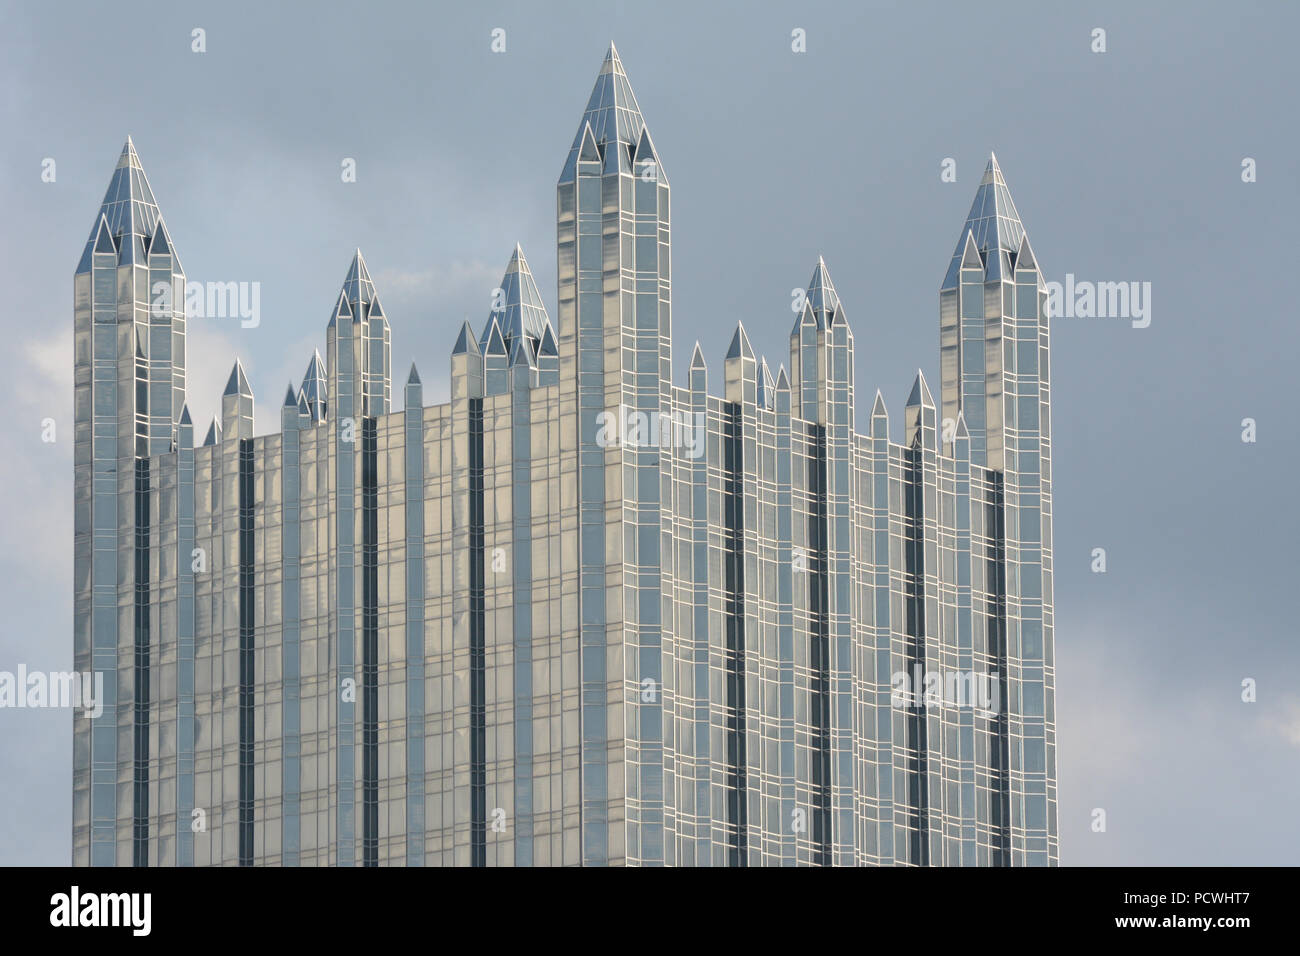 A view of the top section of one of the neogothic style buildings at PPG Place, Pittsburgh, Pennsylvania, USA Stock Photo